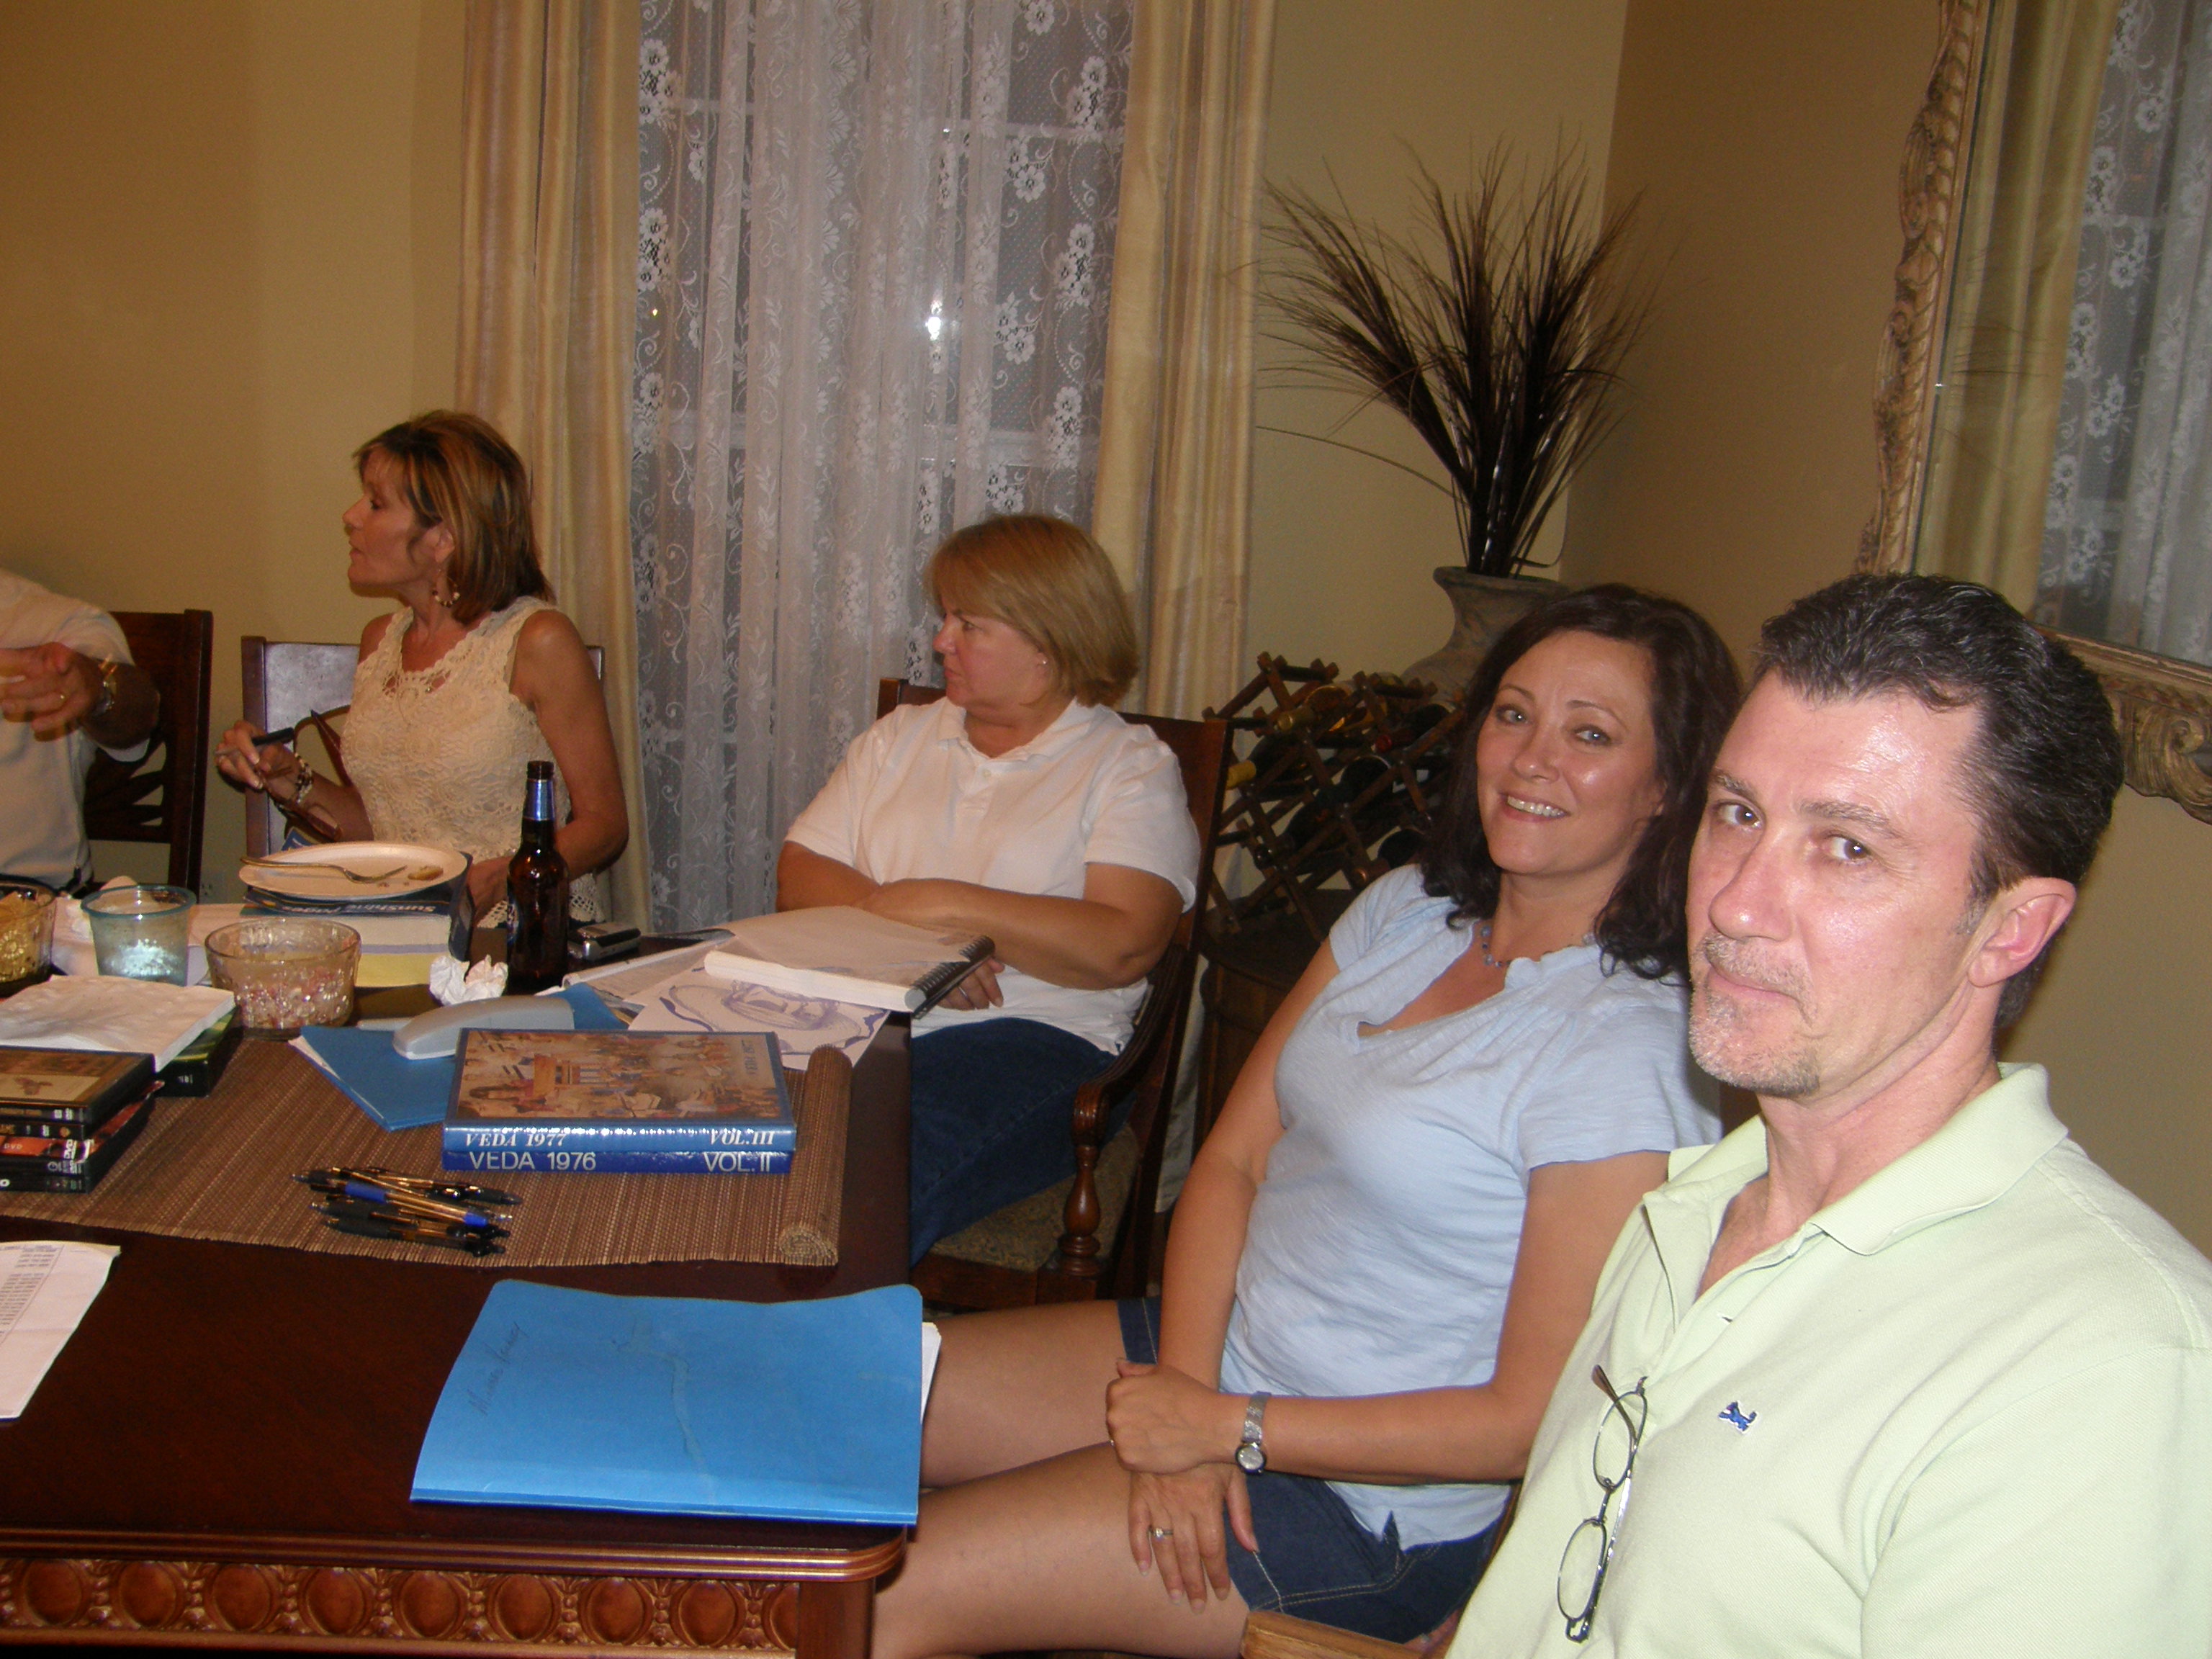 July 12 meeting - Suzy, Cindy, Lisa and Mike